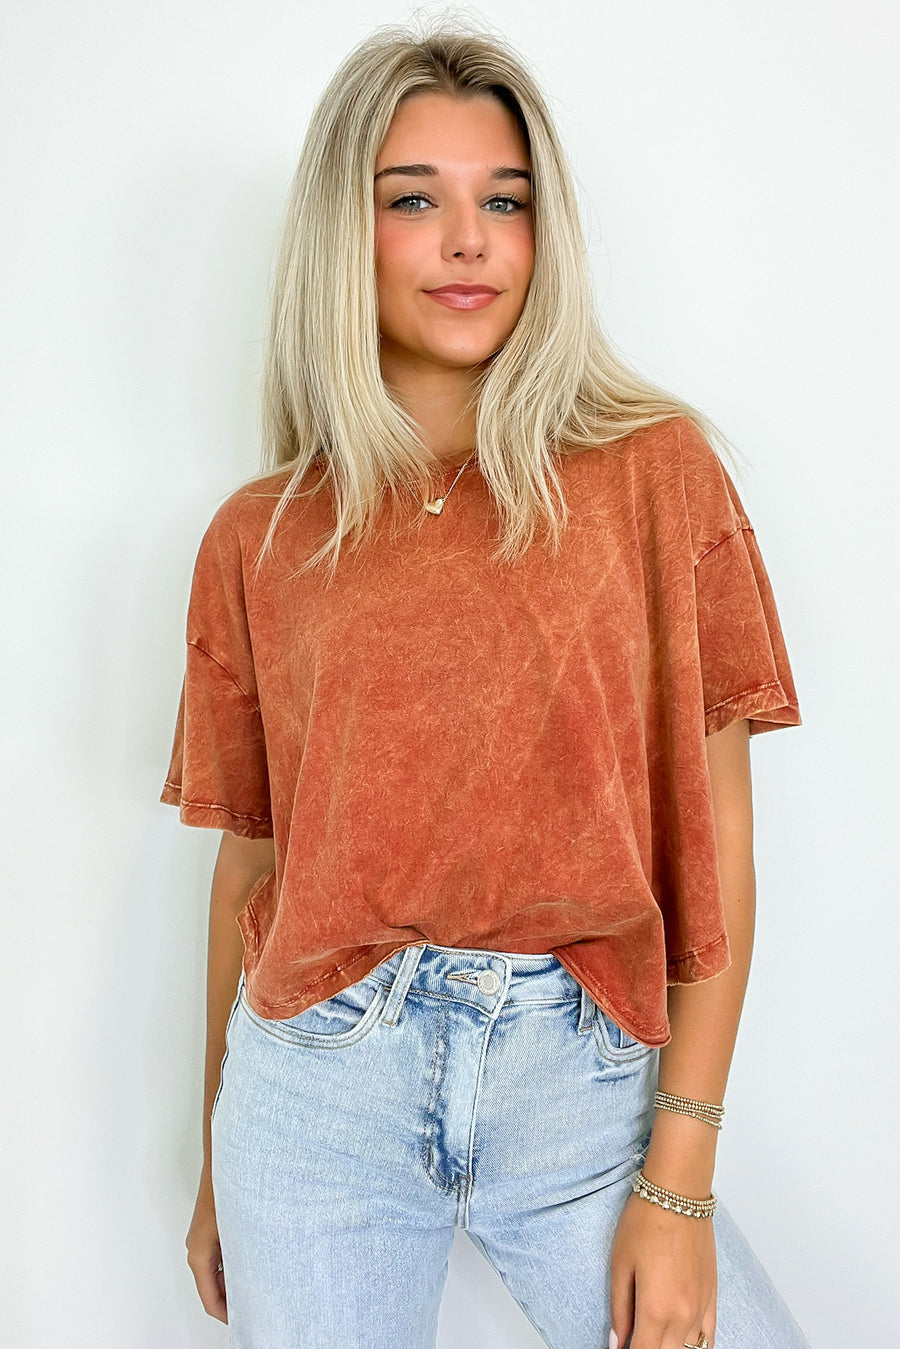 Senoia Mineral Washed Relaxed Fit Top - BACK IN STOCK